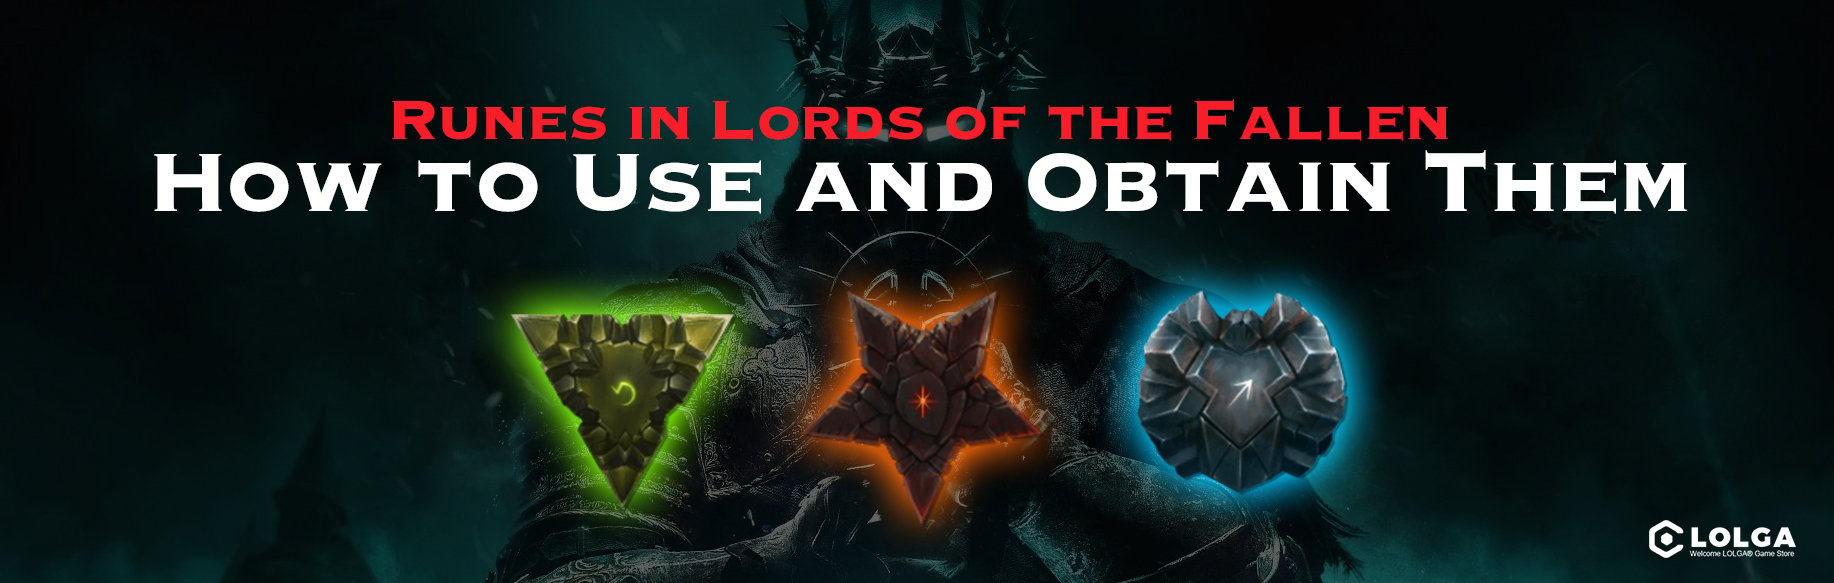 Runes in Lords of the Fallen: How to Use and Obtain Them